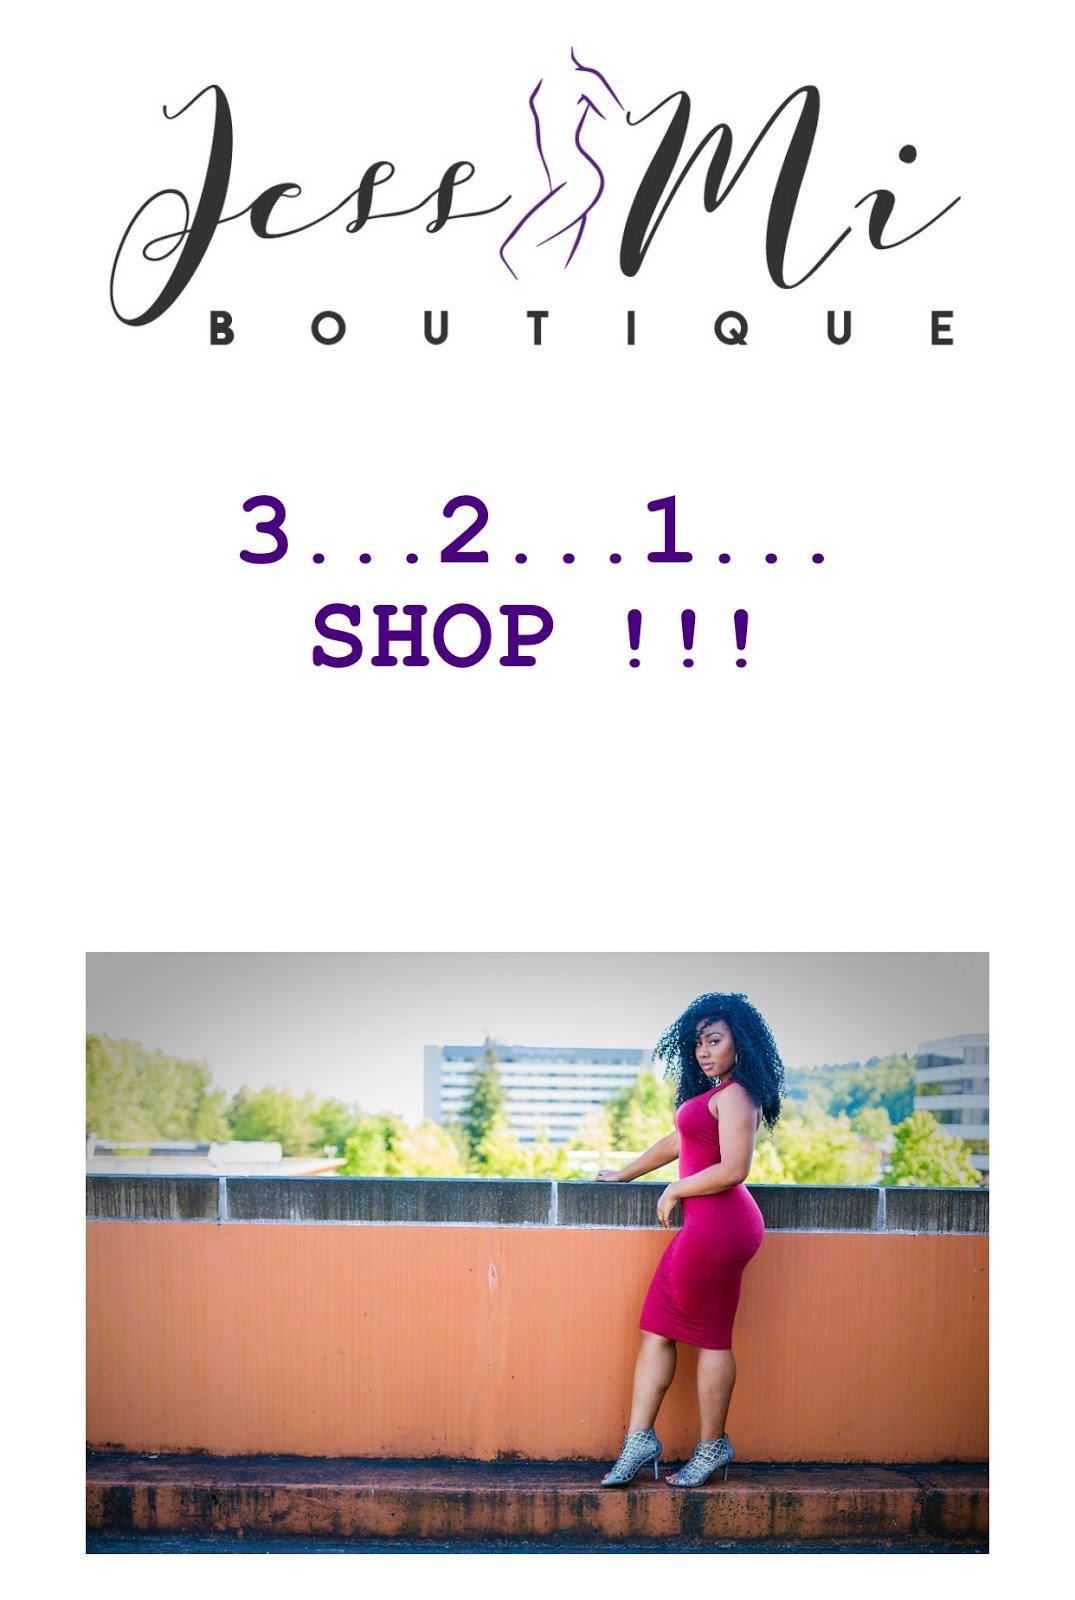 on-starting-an-online-women-s-boutique-without-previous-e-commerce-experience